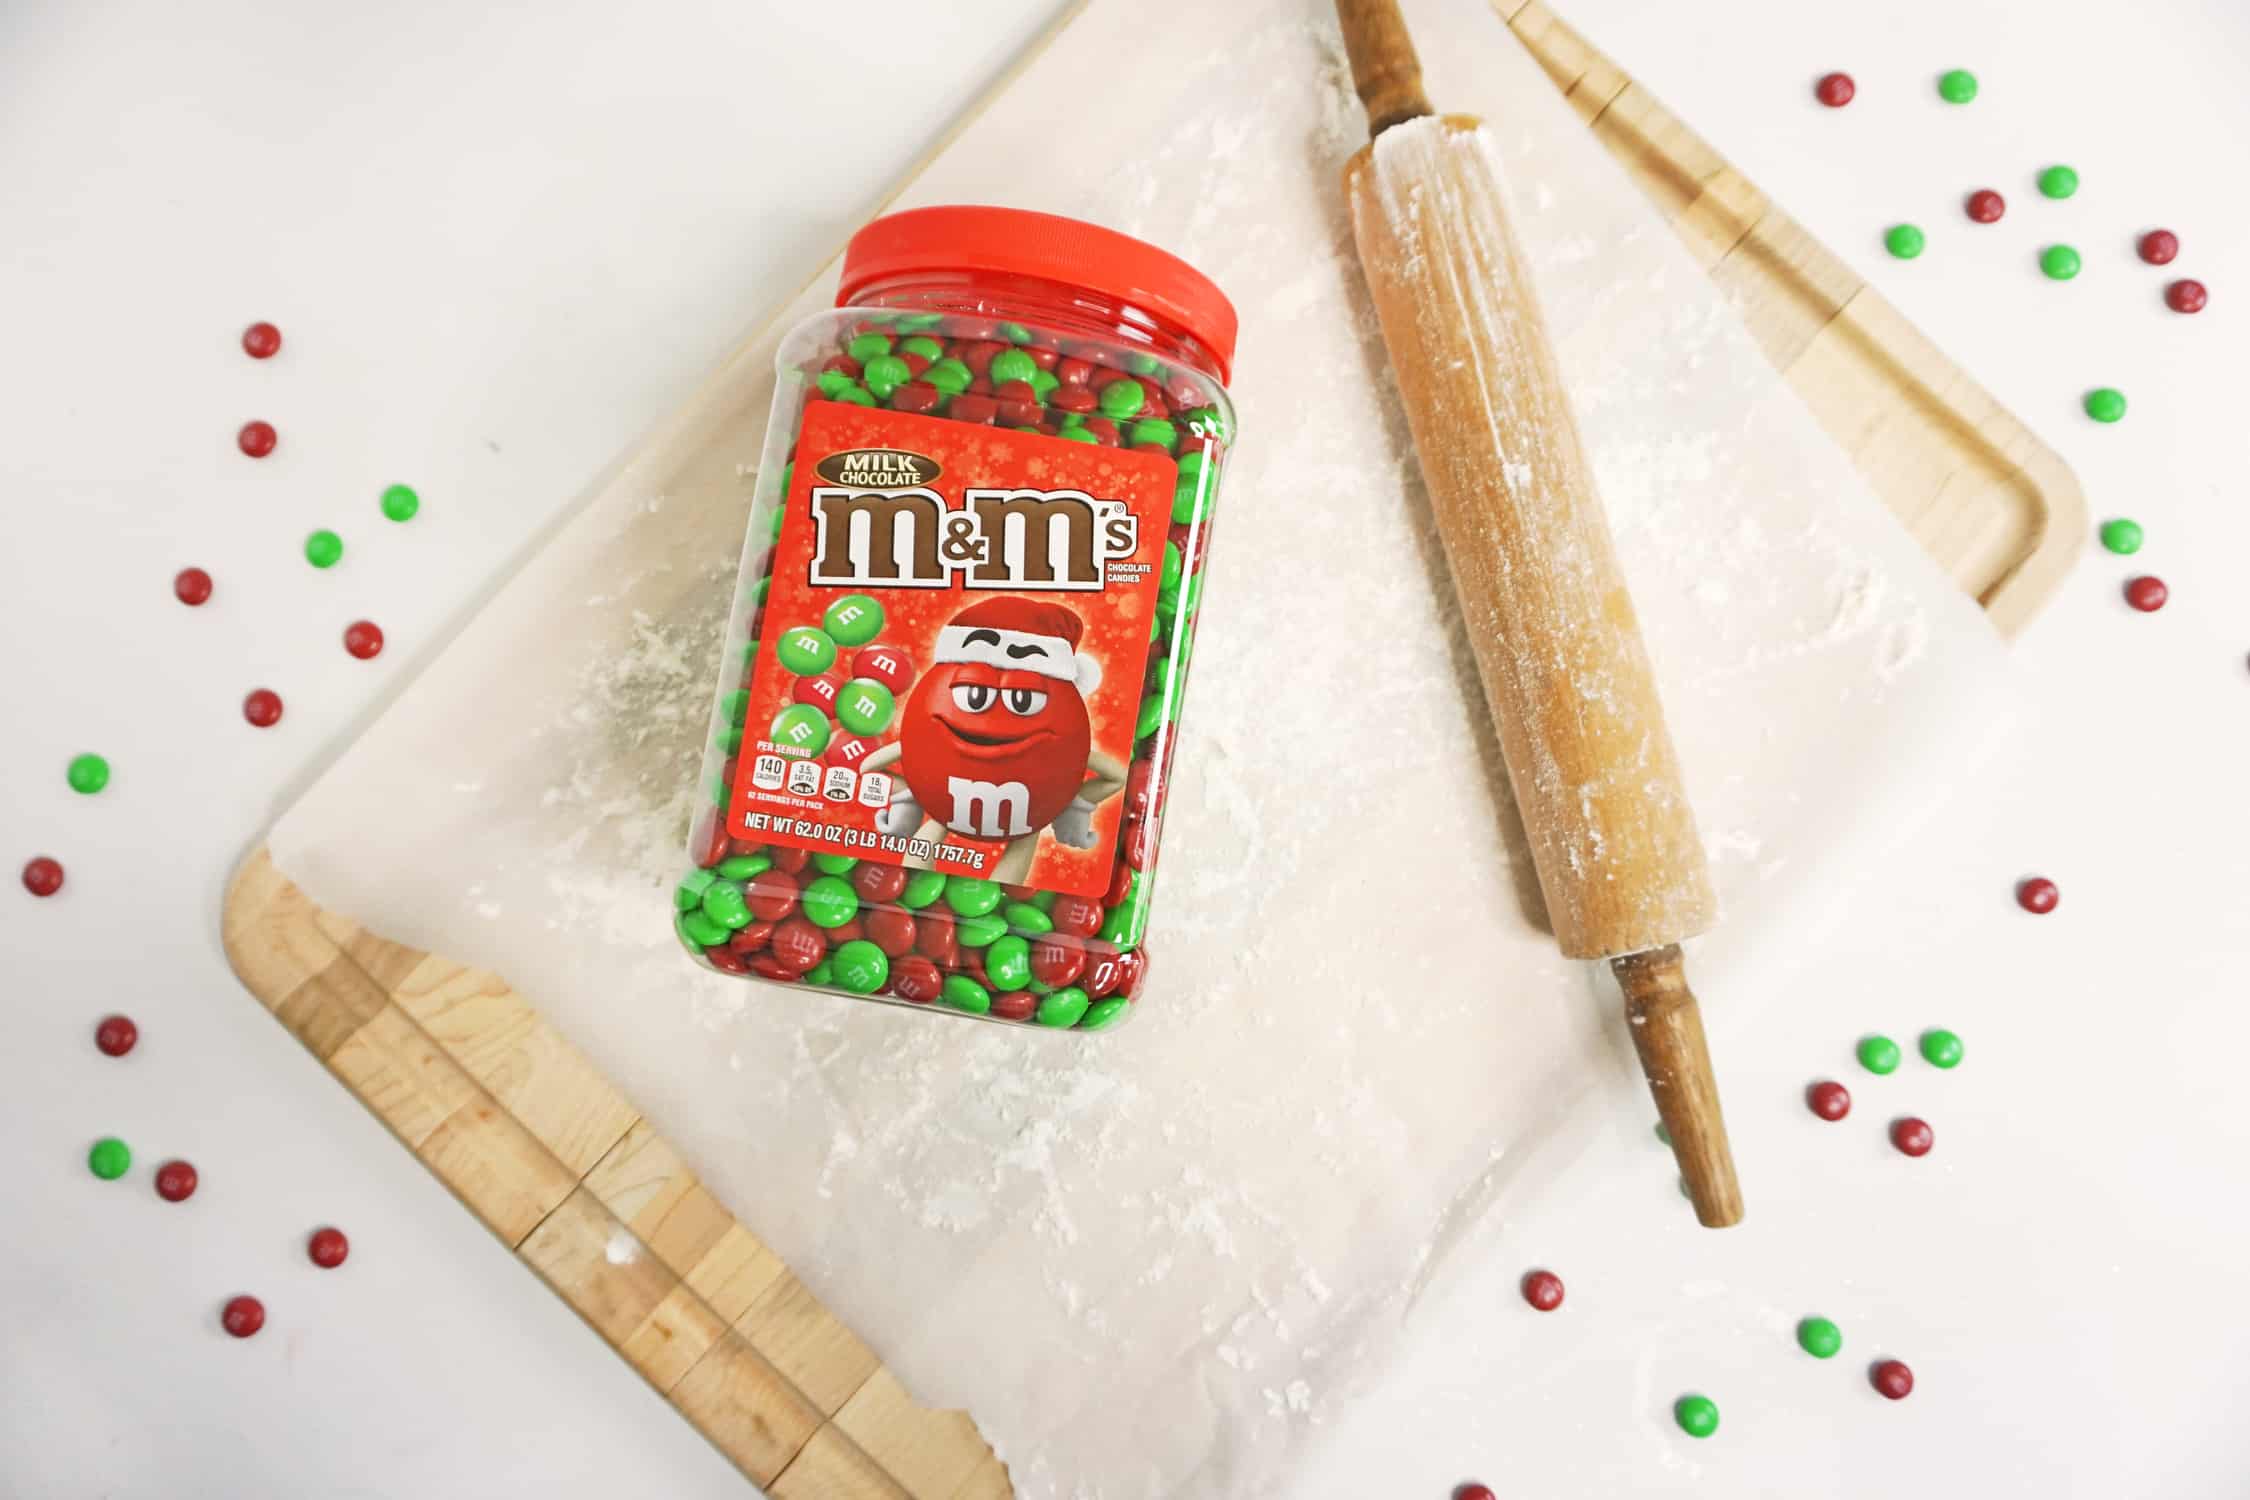 My favorite, most exciting and tasty cookie that joins forces with another love of mine, M&M'S®, is this awesome recipe for 4-Ingredient Holly Cookies. Seriously, only 4 ingredients. I'm in love. #ad #christmascookies